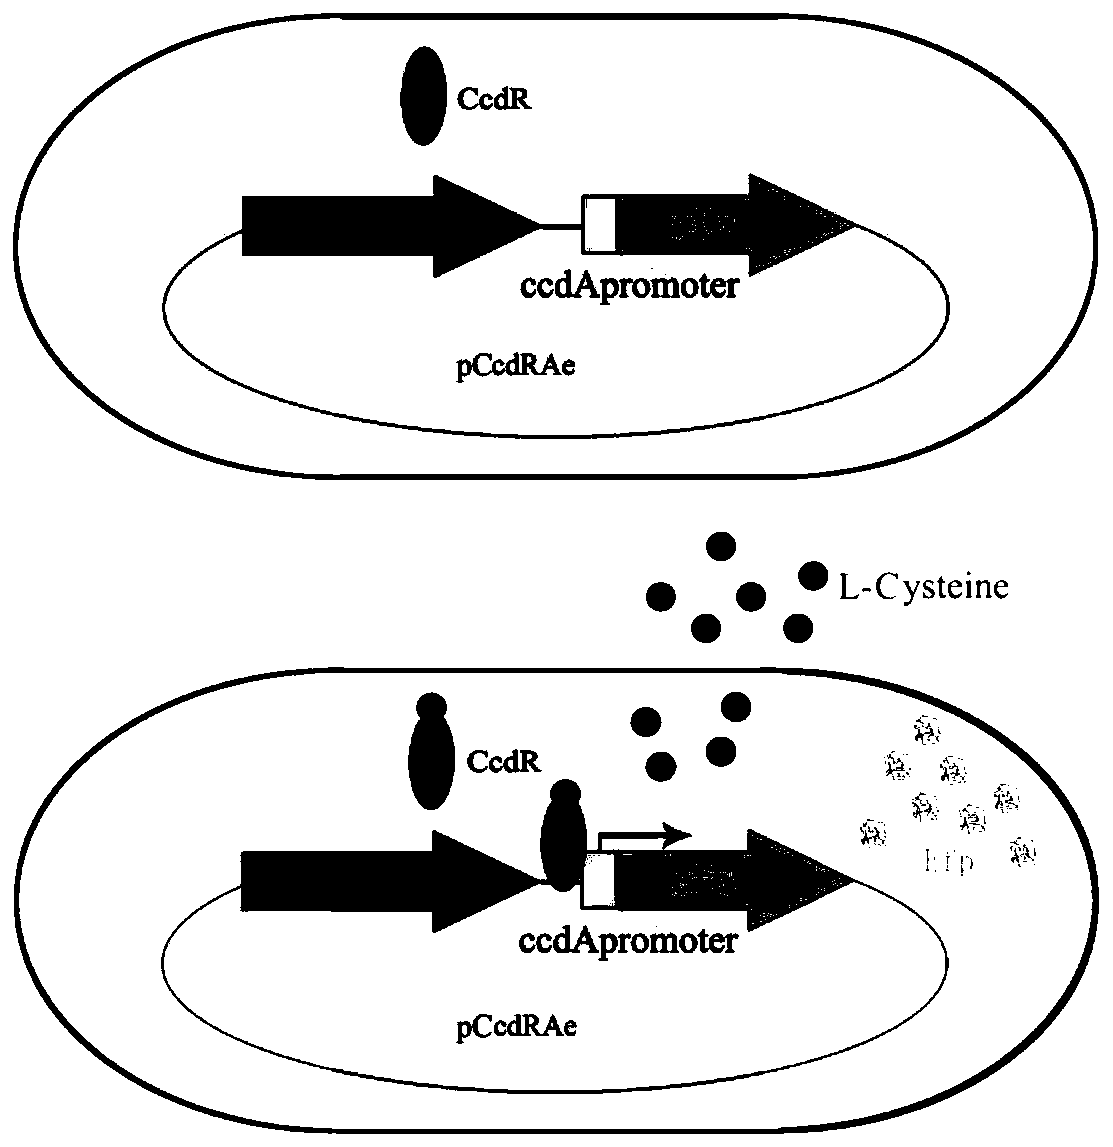 Construction and application of cysteine single-cell biosensor